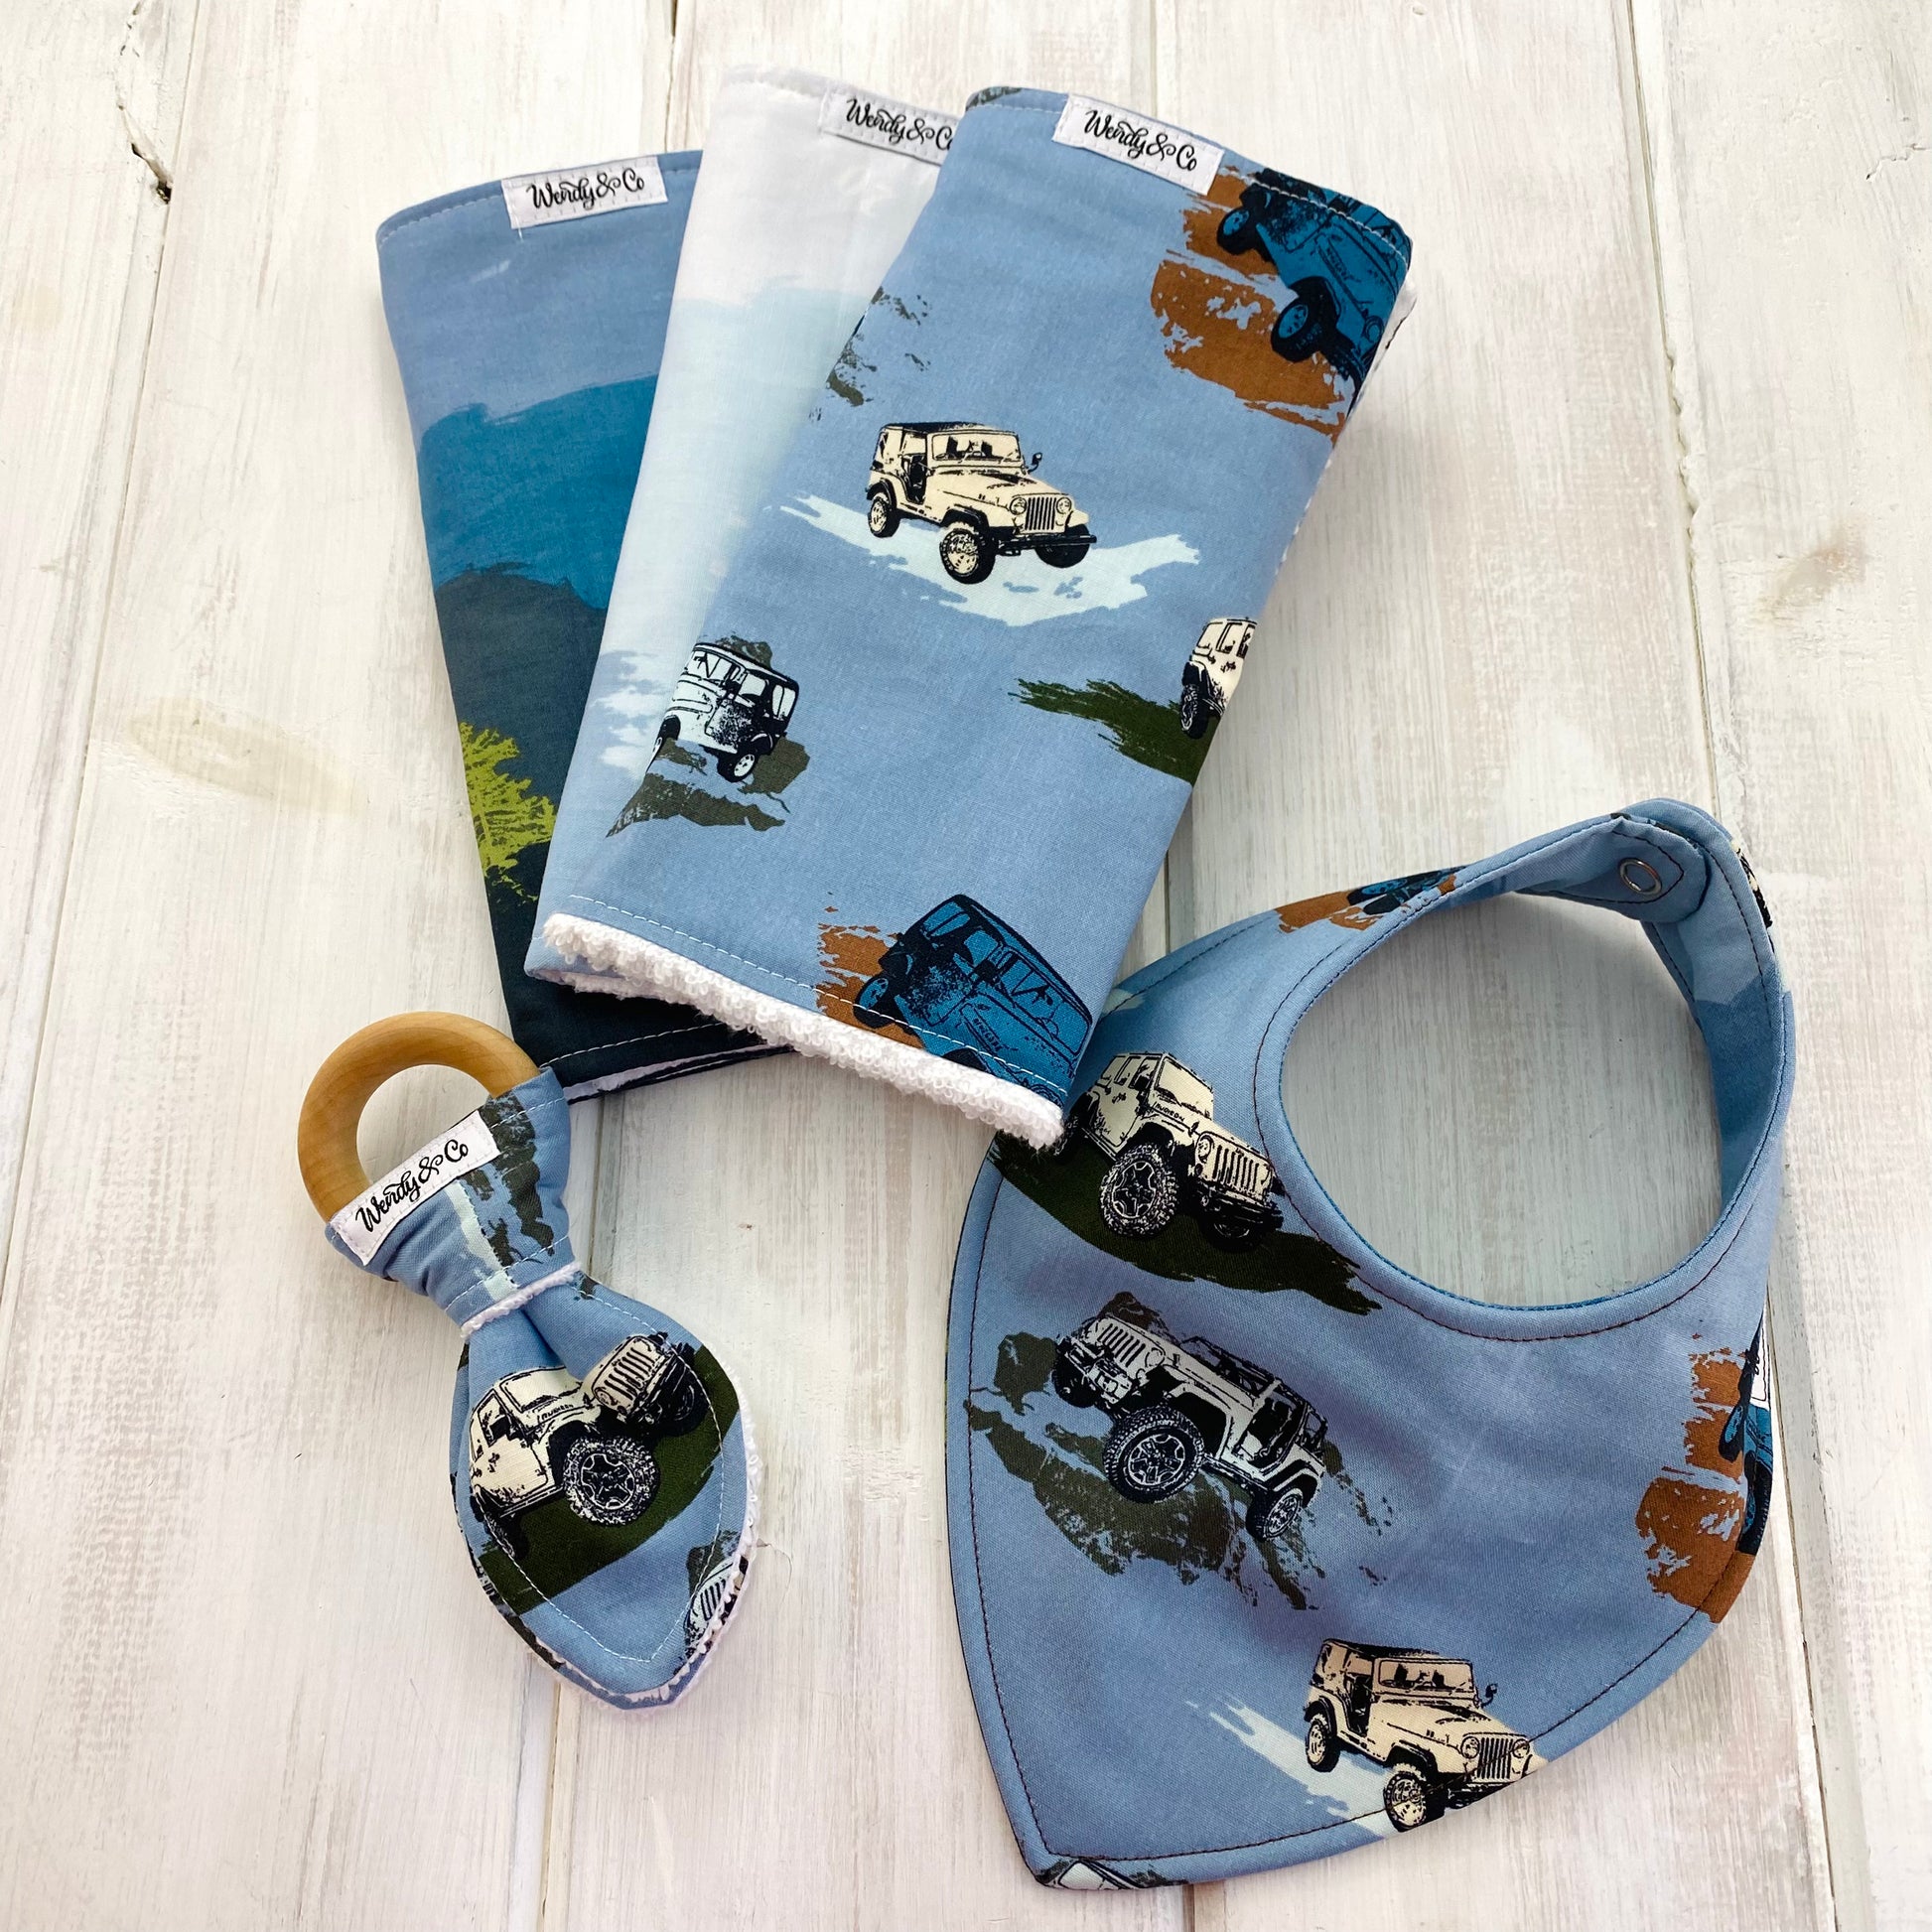 Baby gift set with burp cloths, bib & teether in Jeep pattern.